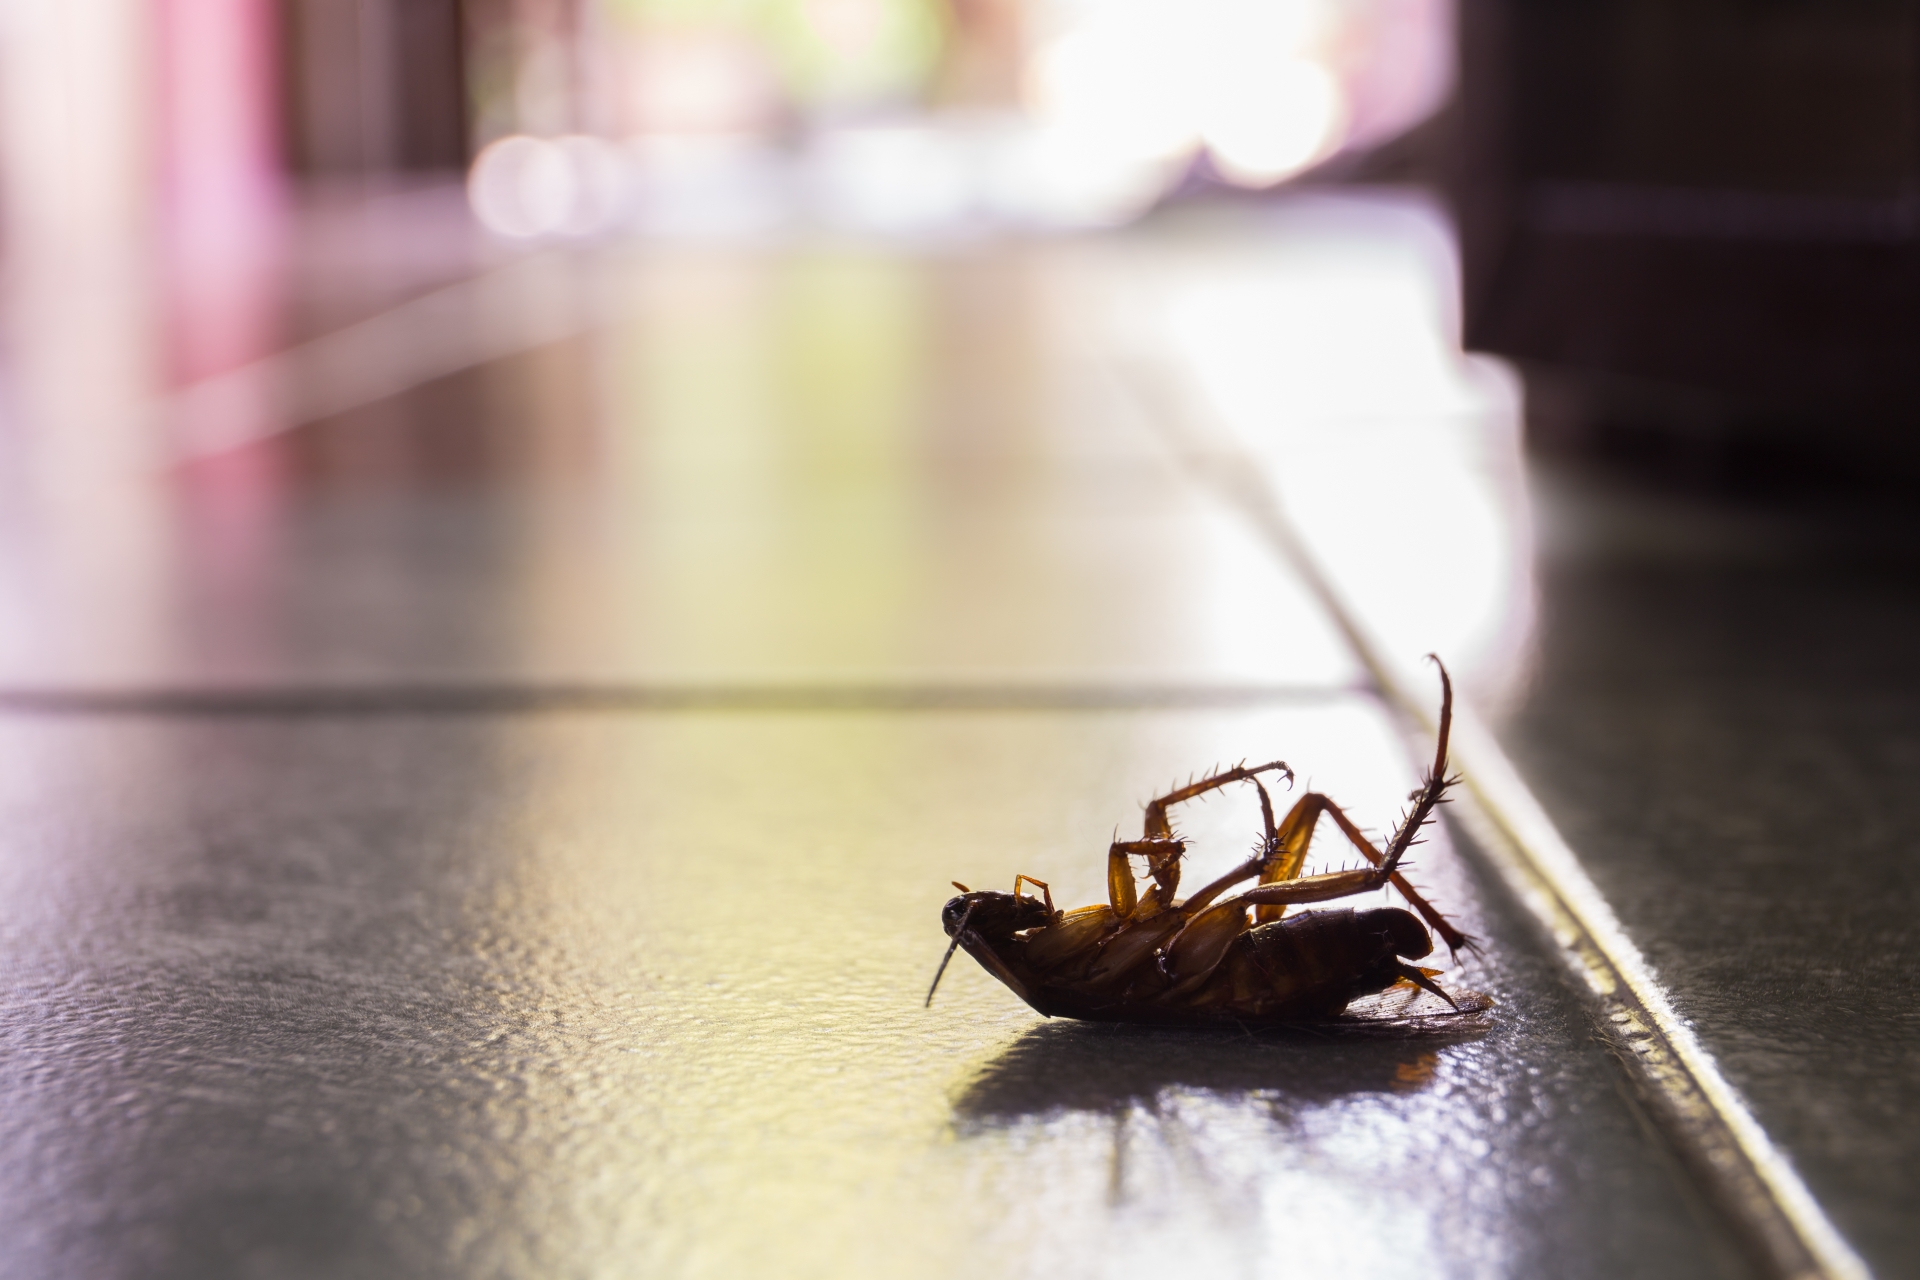 Cockroach Control, Pest Control in Chiswick, W4. Call Now 020 8166 9746